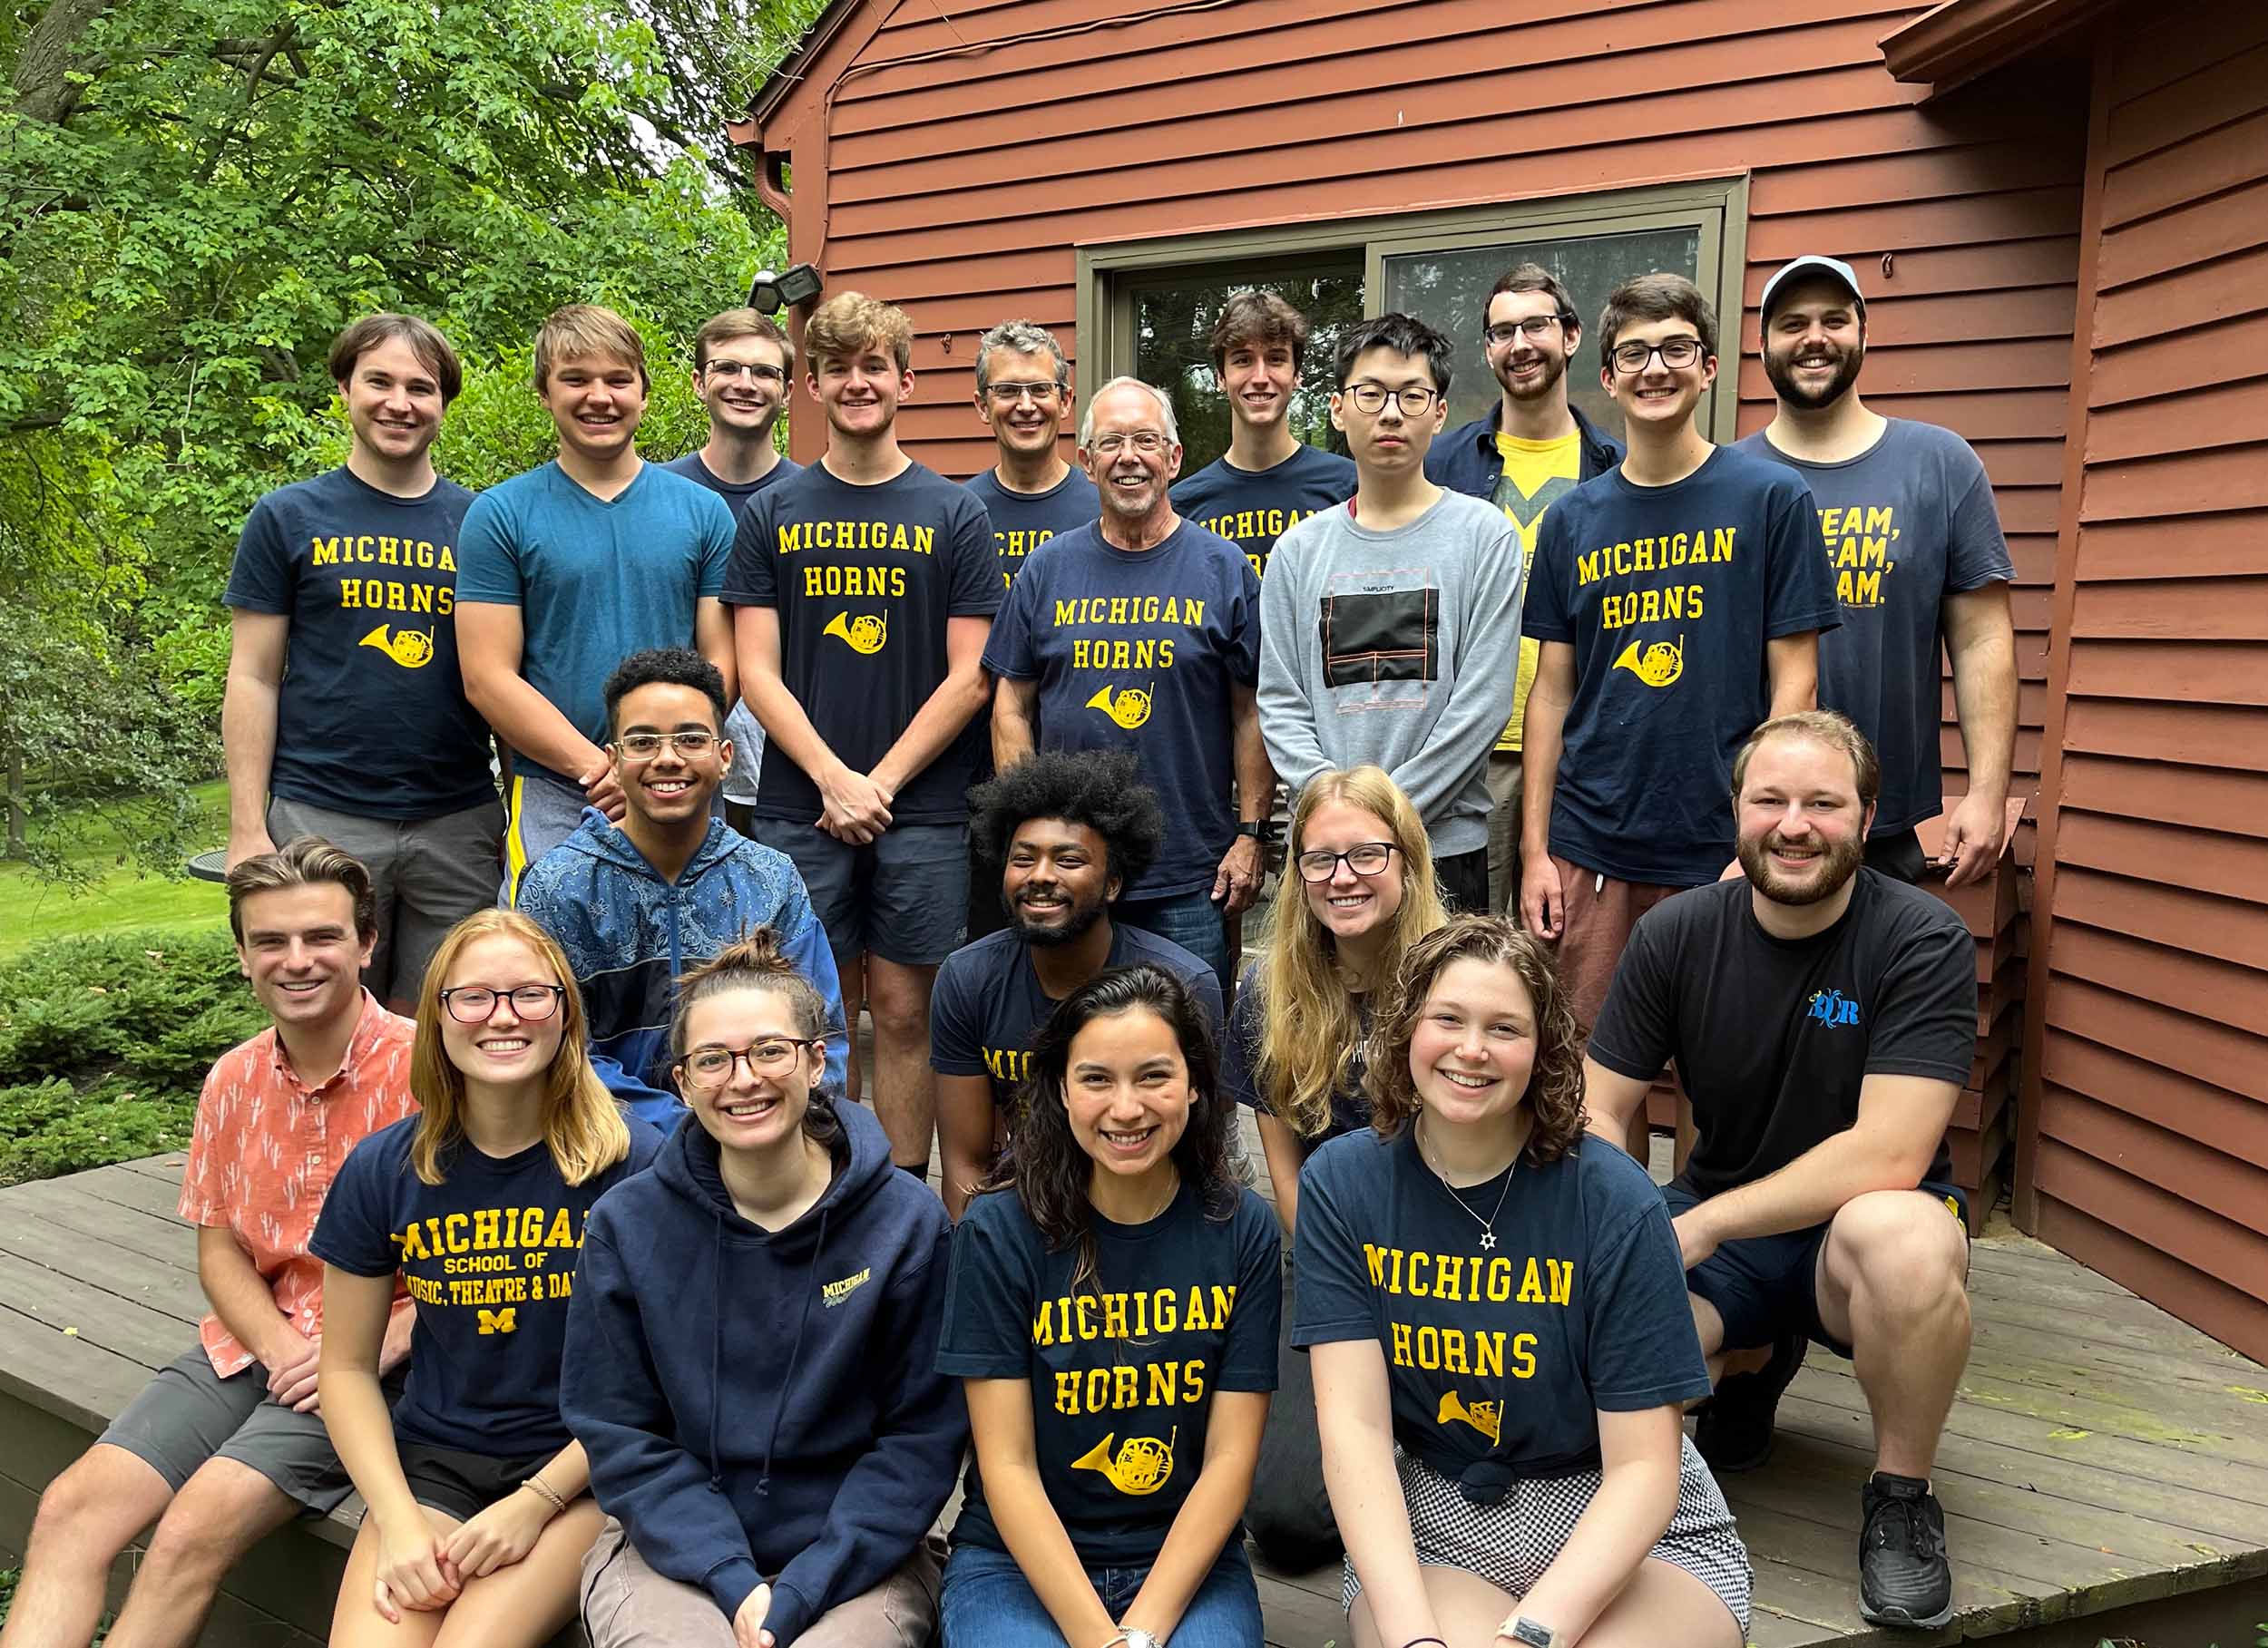 A group of 20 students and faculty poses outdoors, most of them wearing "Michigan Horns" t-shirts.